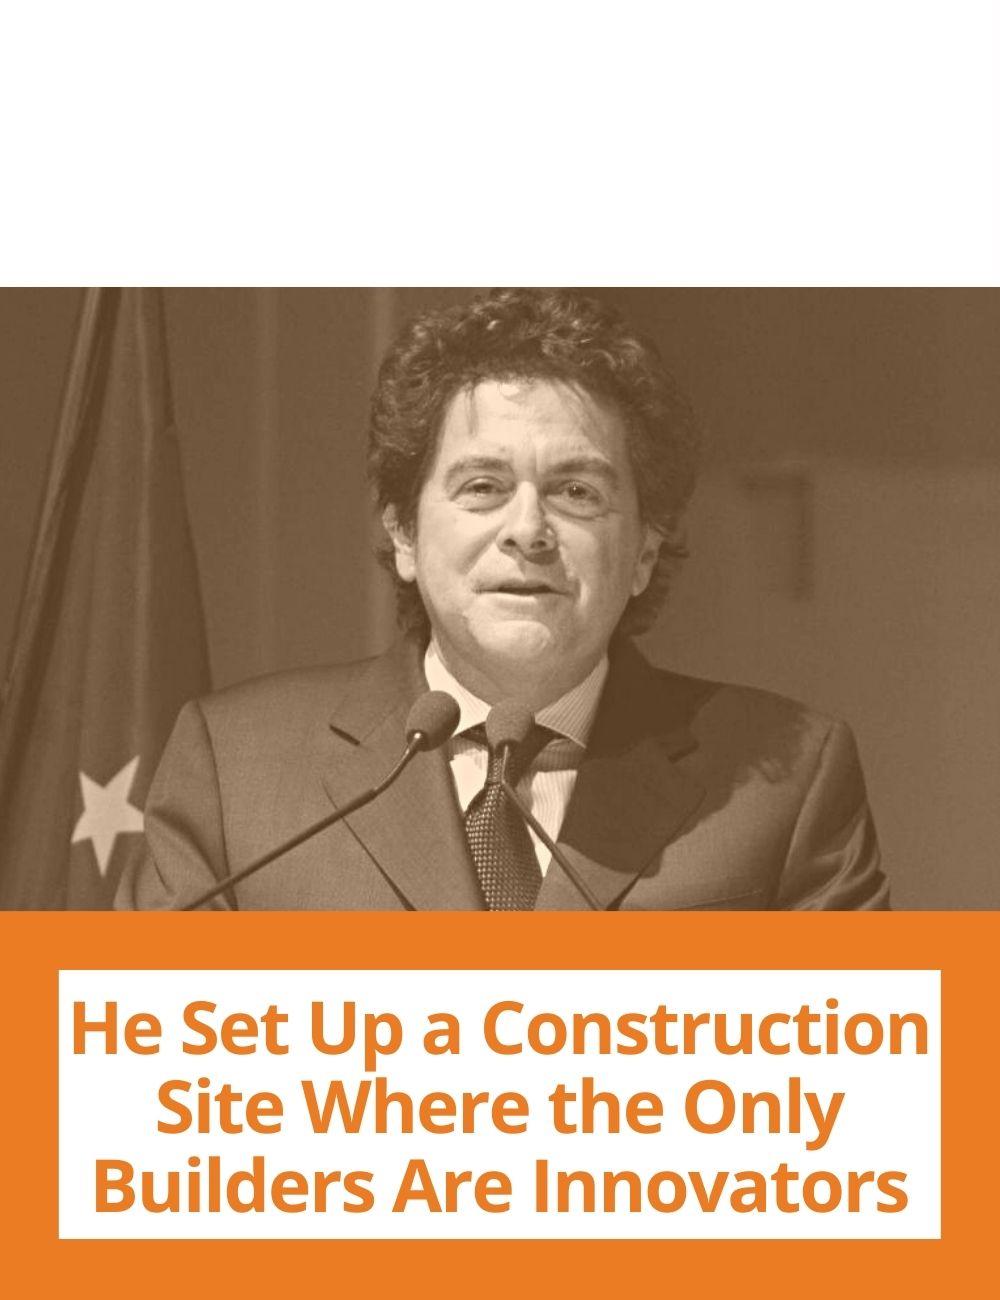 Link to related stories. Image: a photo of Alberto Alesina. Story headline: He Set Up a Construction Site Where the Only Builders Are Innovators